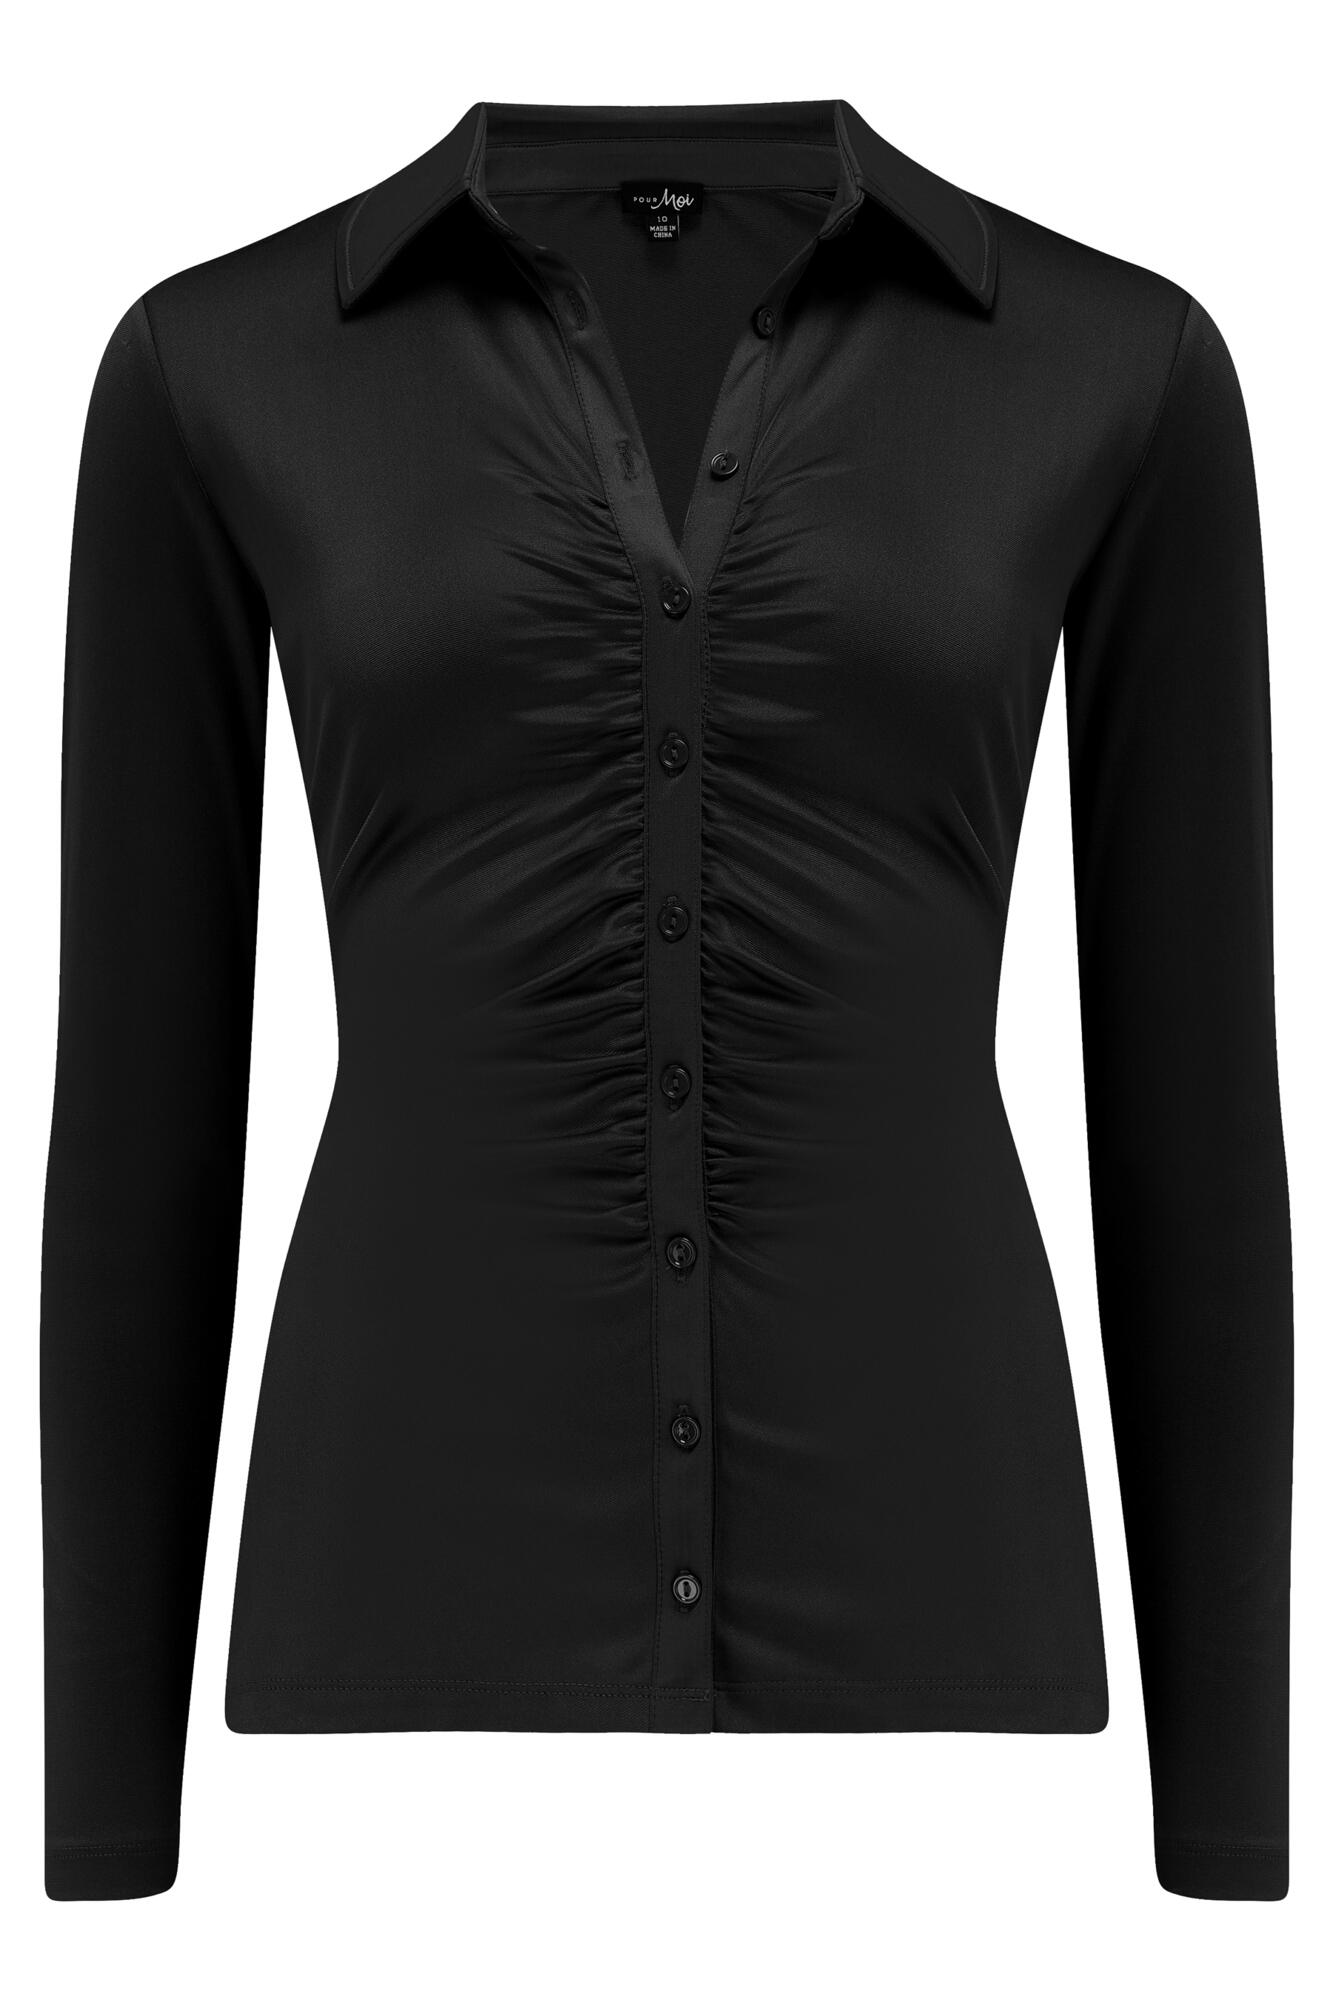 Brooke Shine Stretch Jersey Ruched Front Shirt in Black | Pour Moi